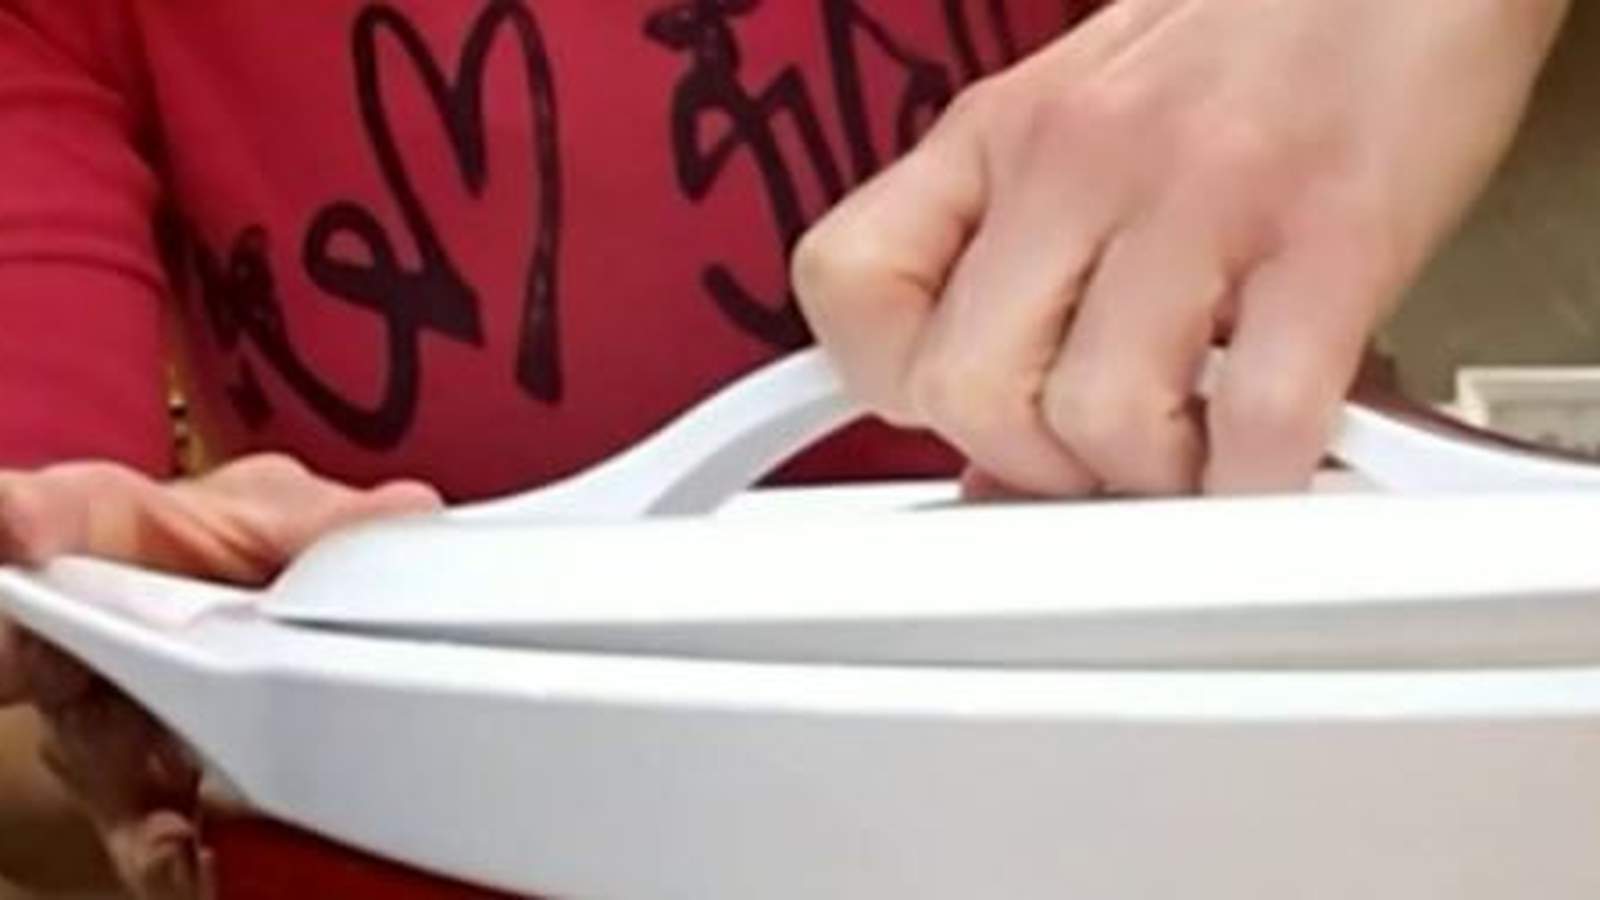 Test it Tuesday: Will this bowl keep your food hot for 6 hours?